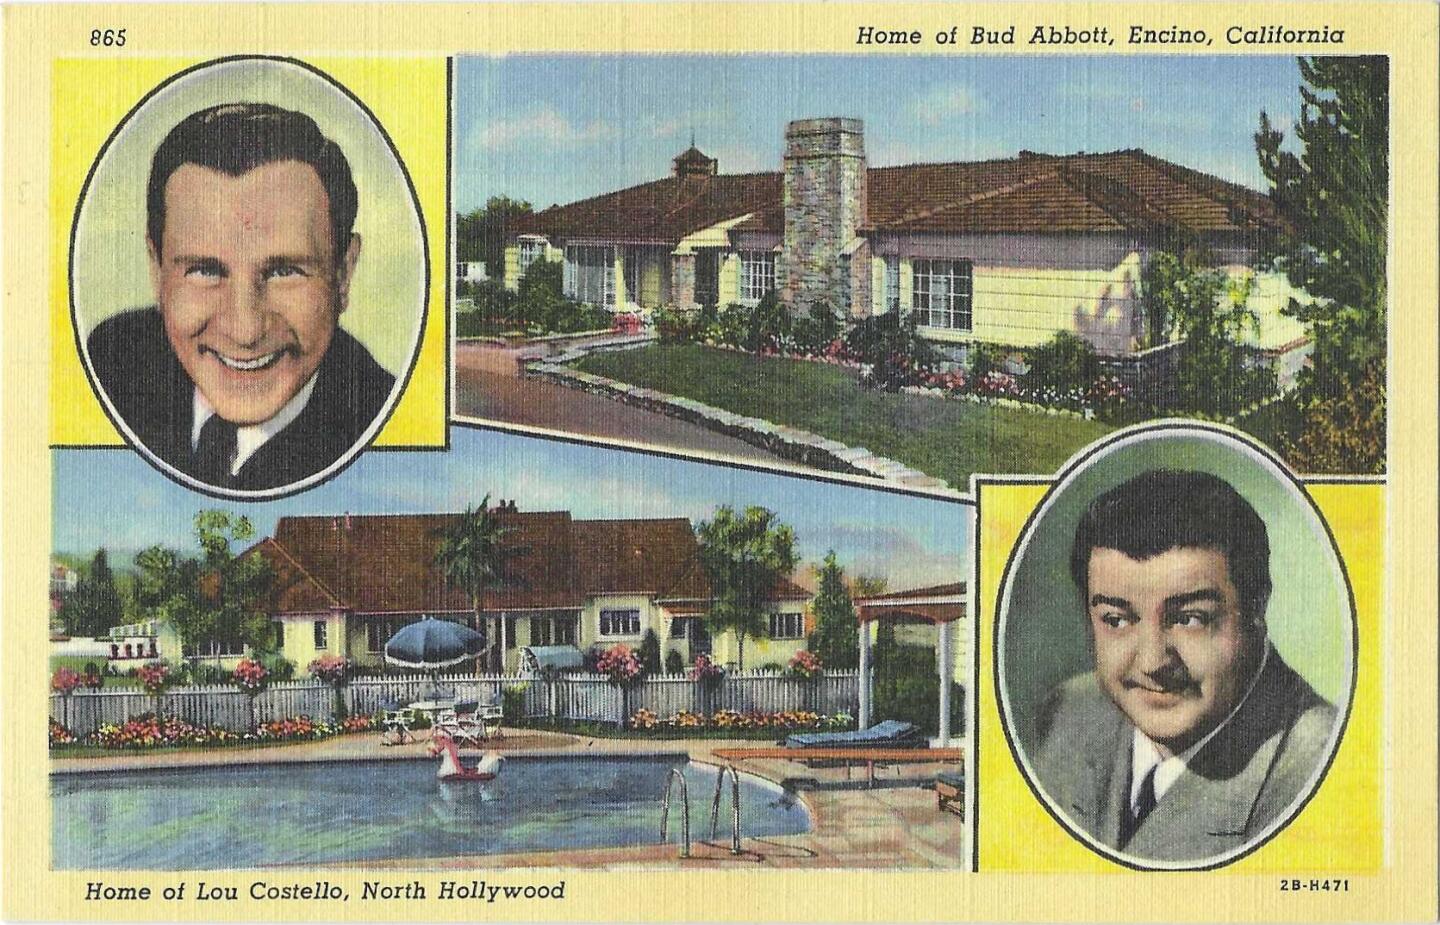 Postcard shows Abbott and Costello's homes